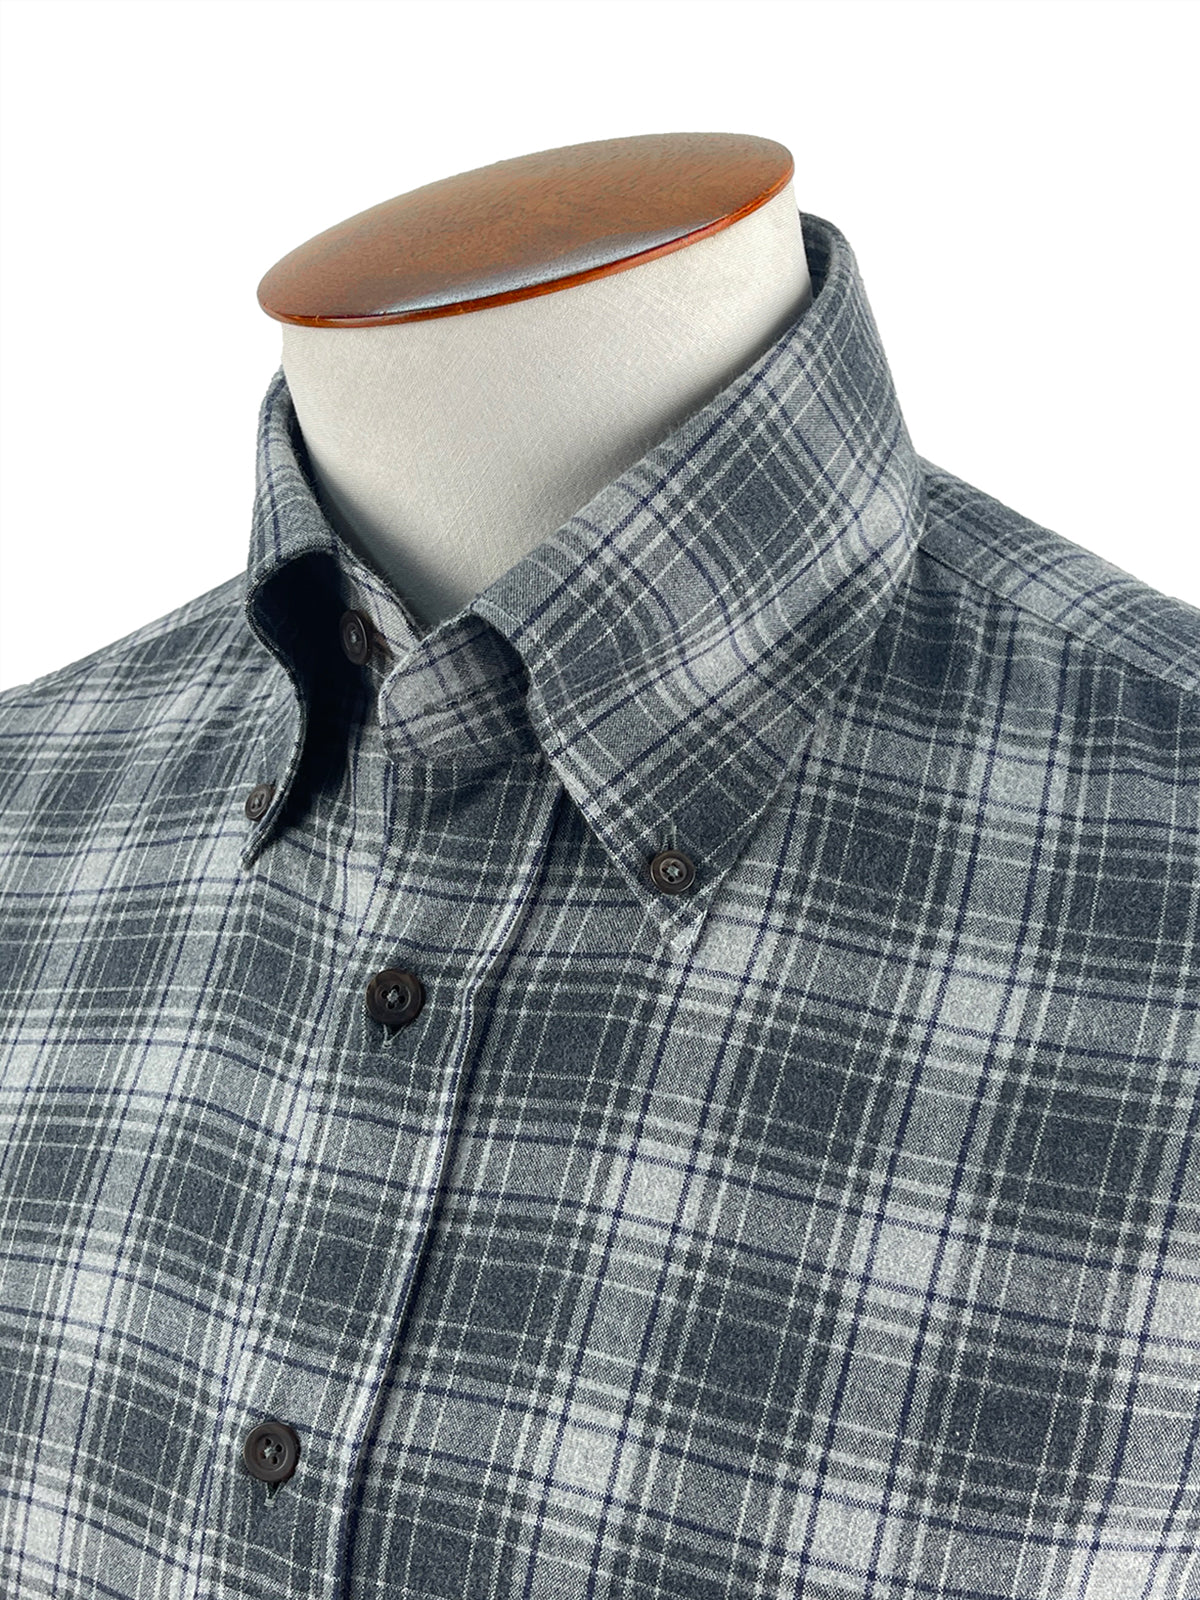 Mixed Grey Check Flannel Button Down Shirt